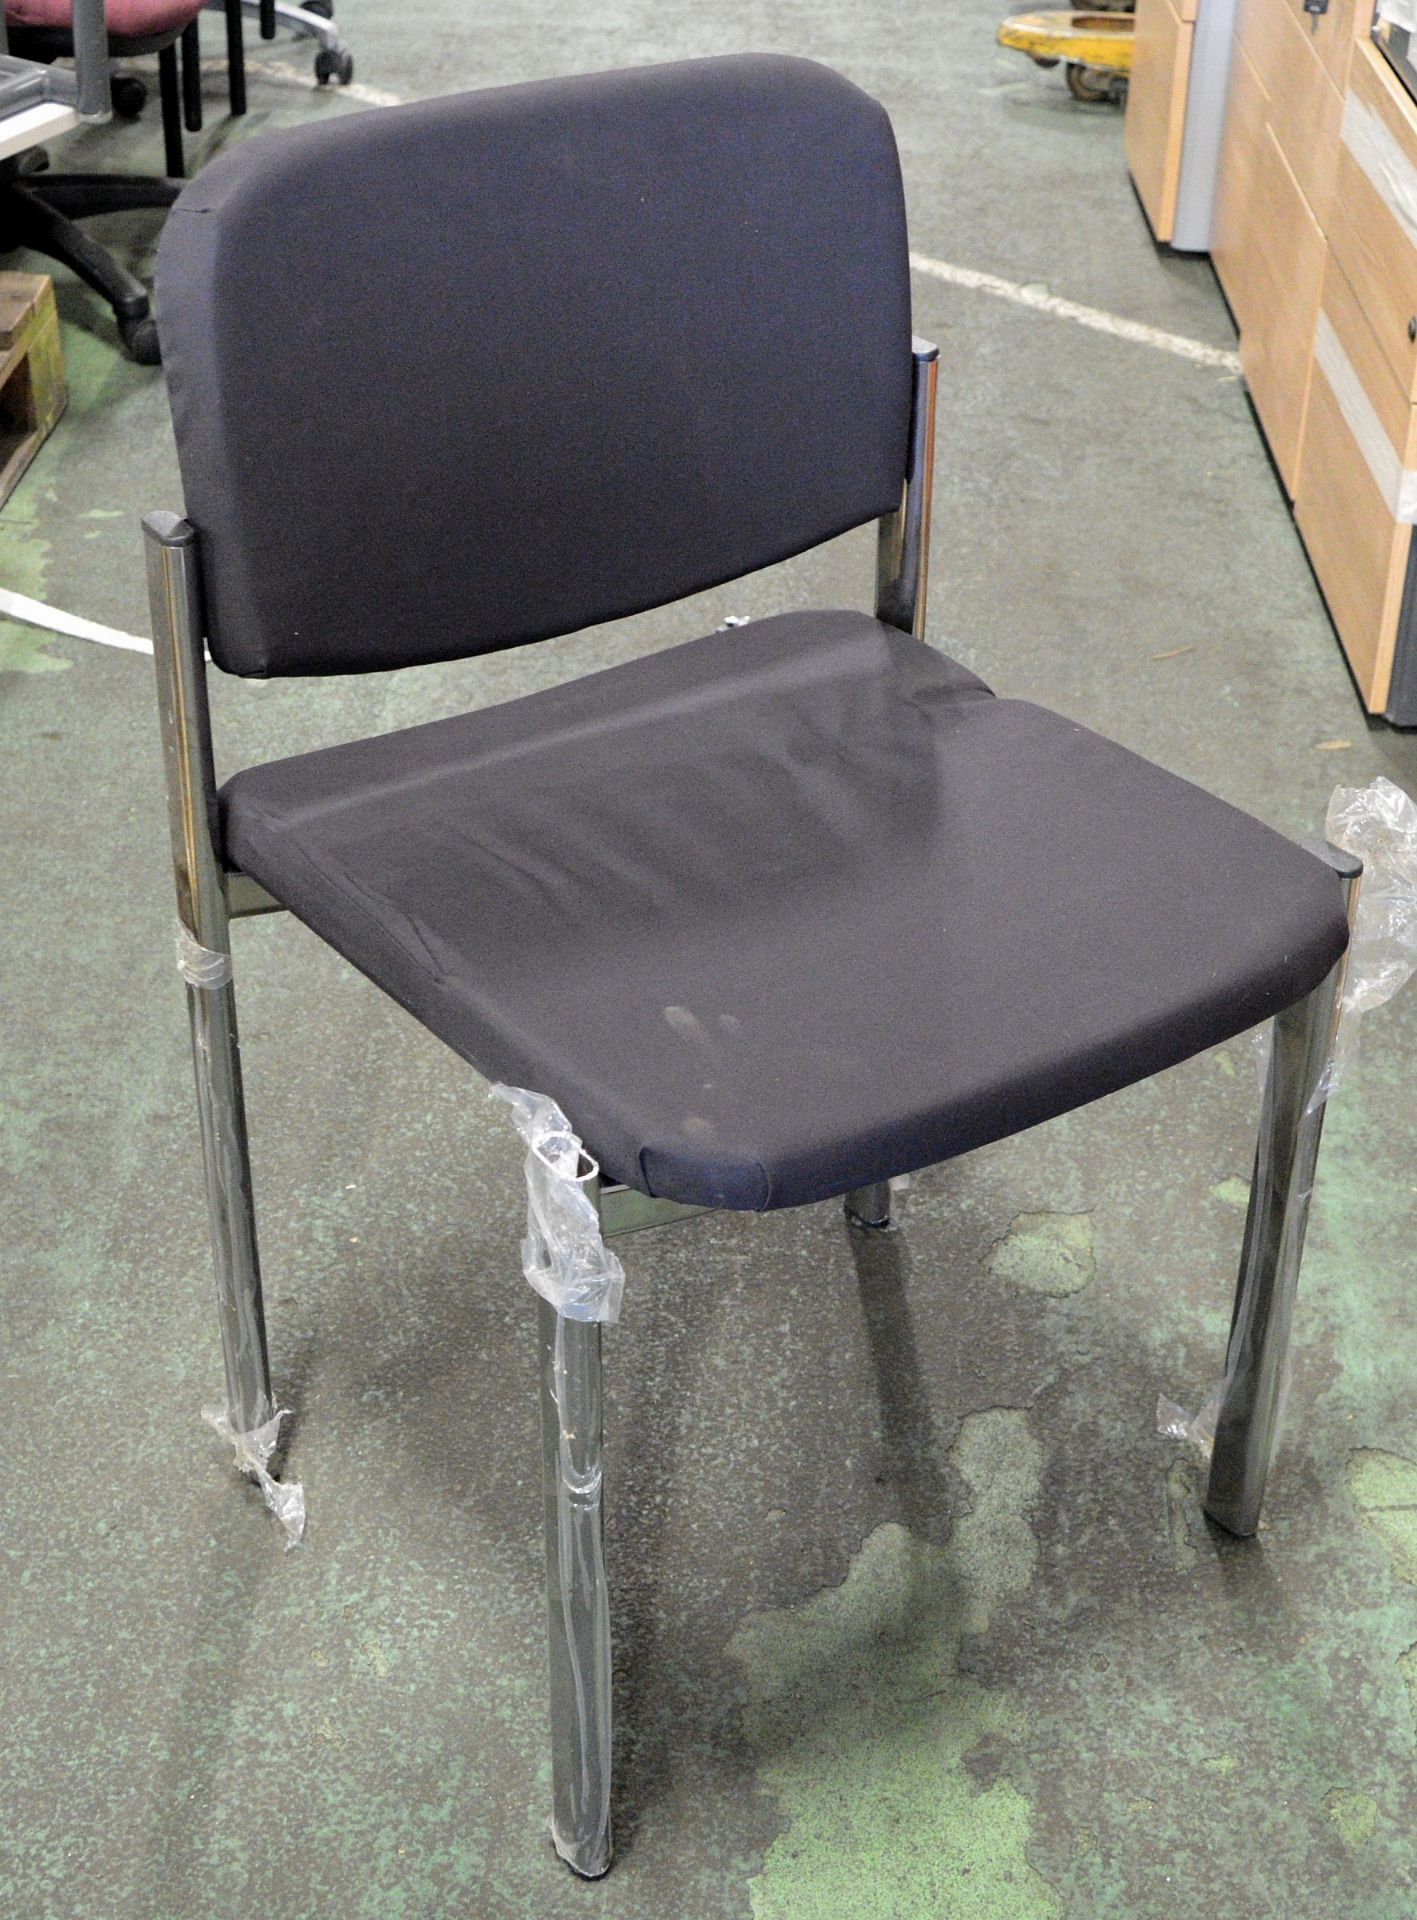 10x Straight Chairs - Image 2 of 3